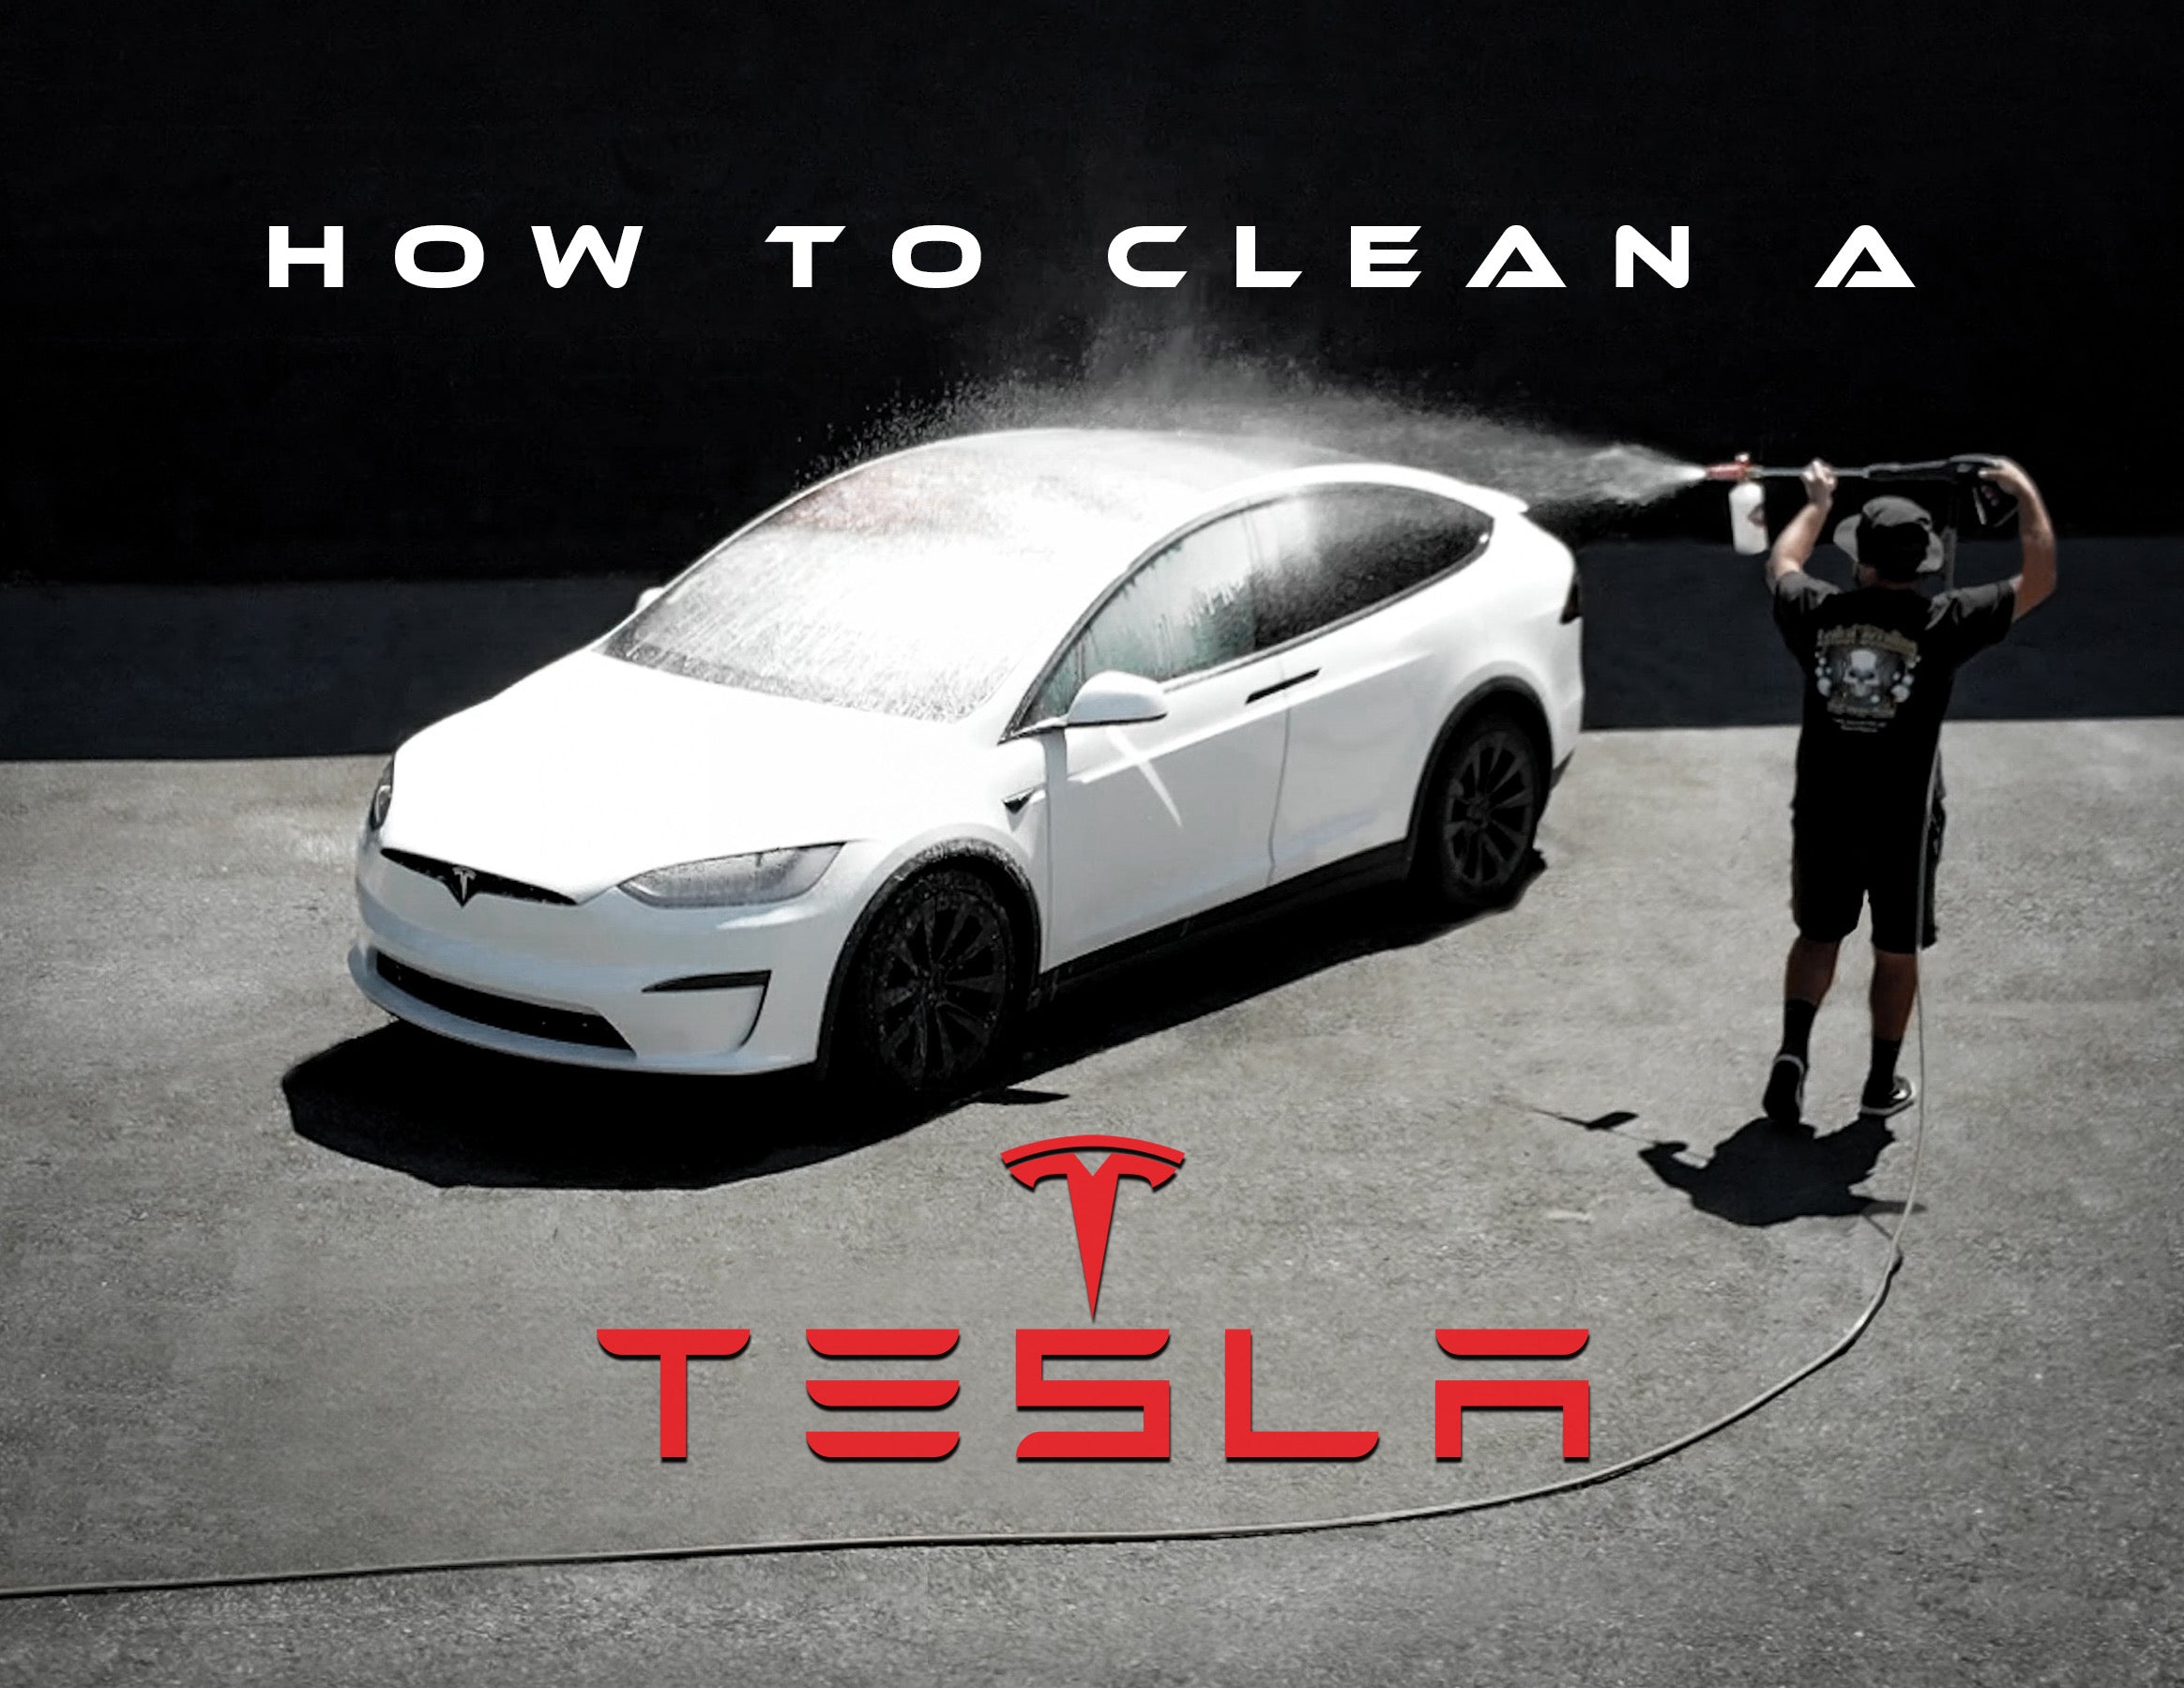 How to clean a Tesla - Renegade Products USA